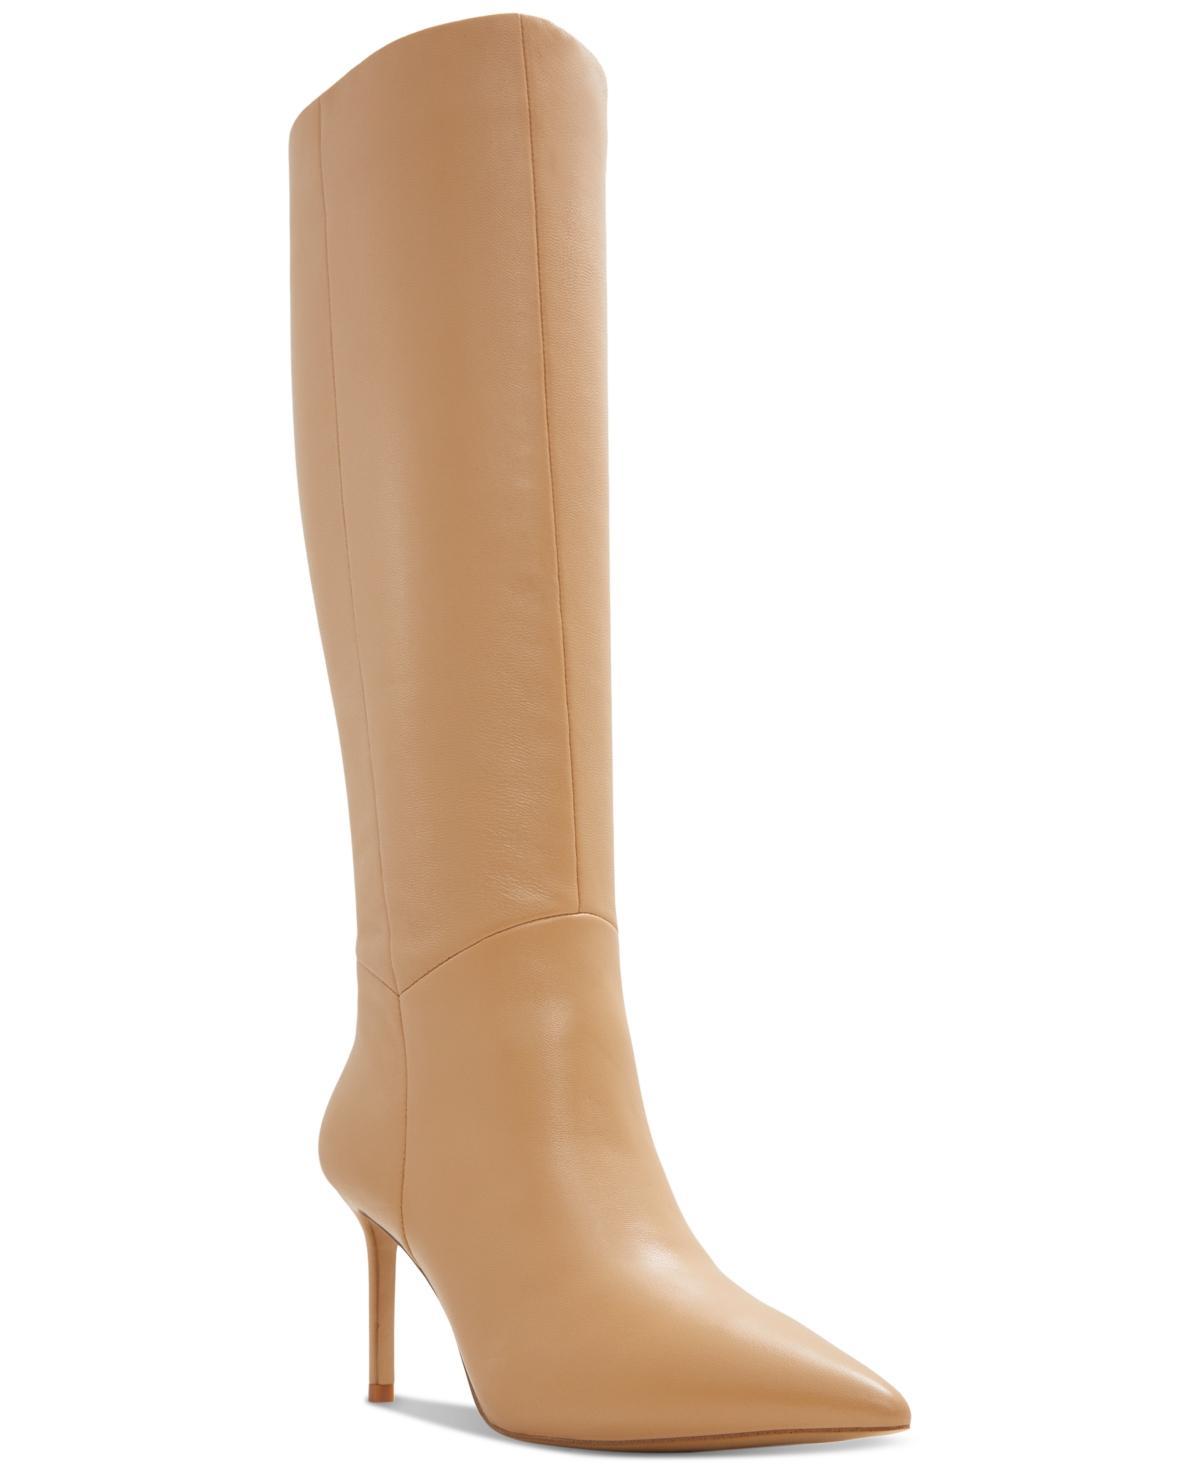 ALDO Laroche Pointed Toe Knee High Boot Product Image